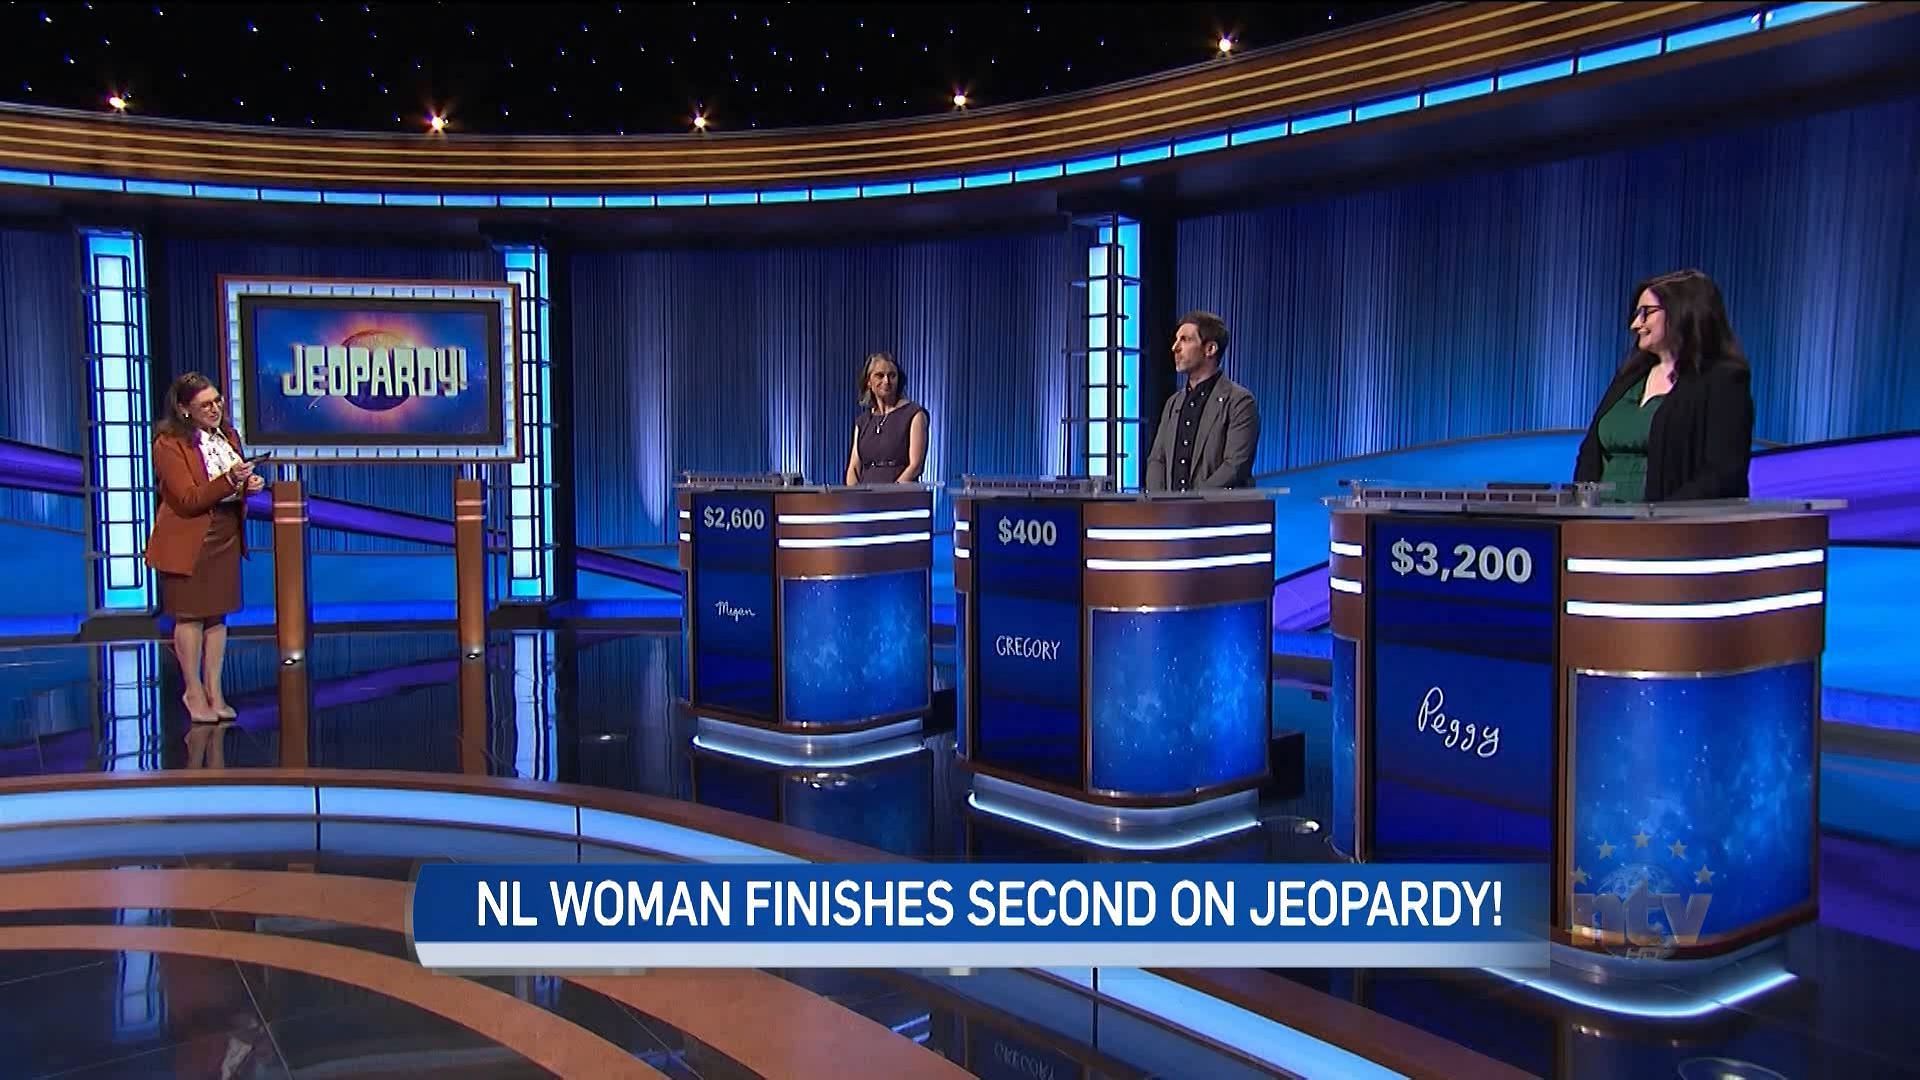 Today's Final Jeopardy! question, answer & contestants July 18, 2022